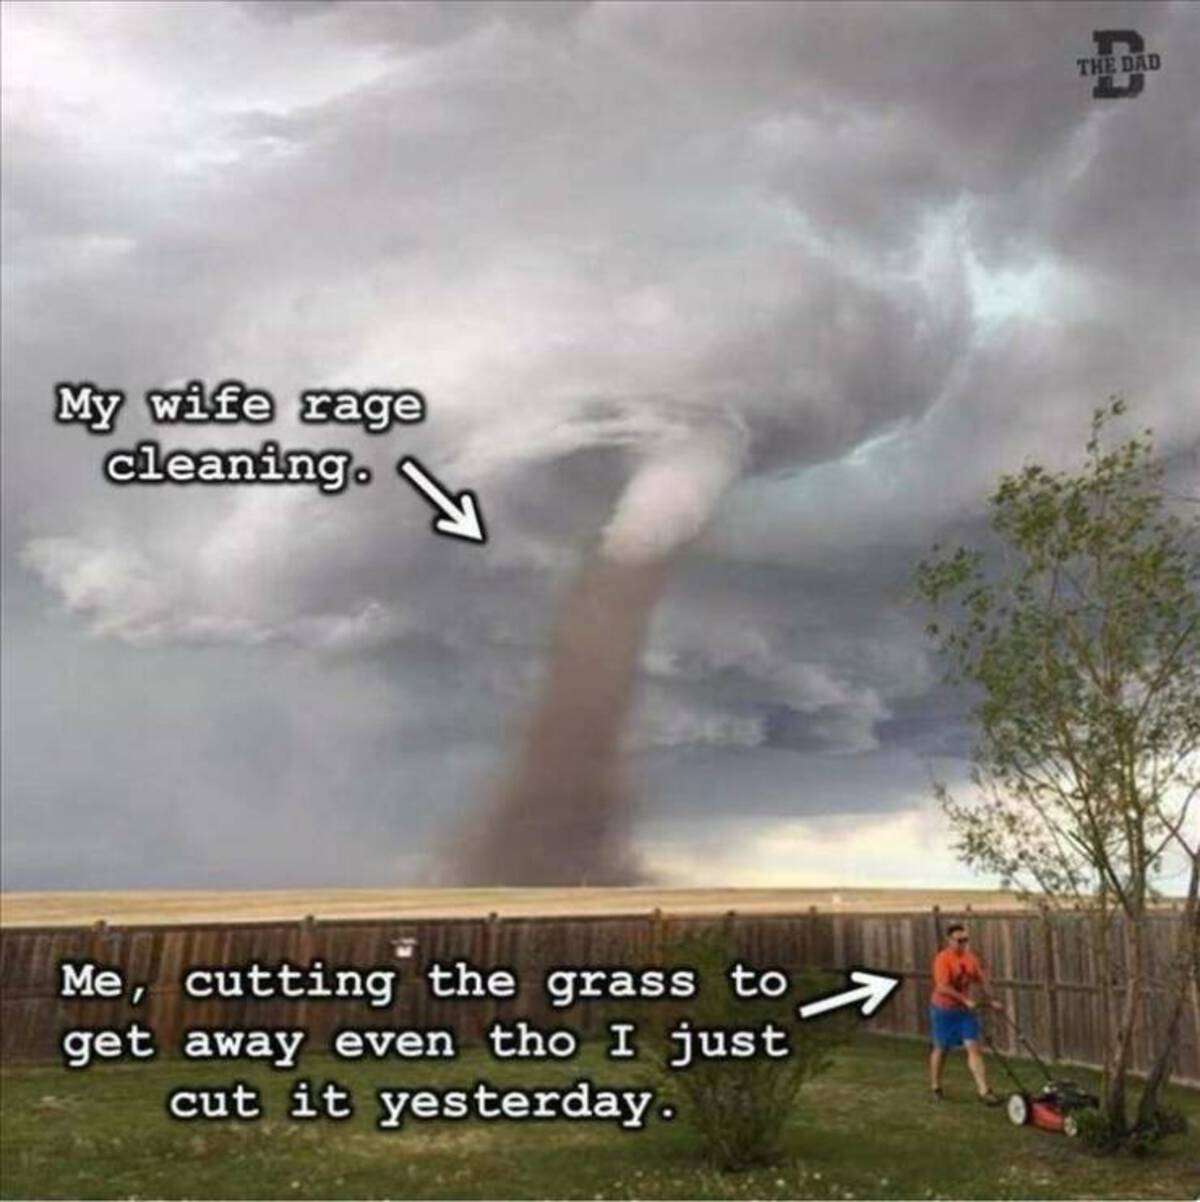 tornadoes alberta - My wife rage cleaning. Me, cutting the grass to get away even tho I just cut it yesterday. The Dad D